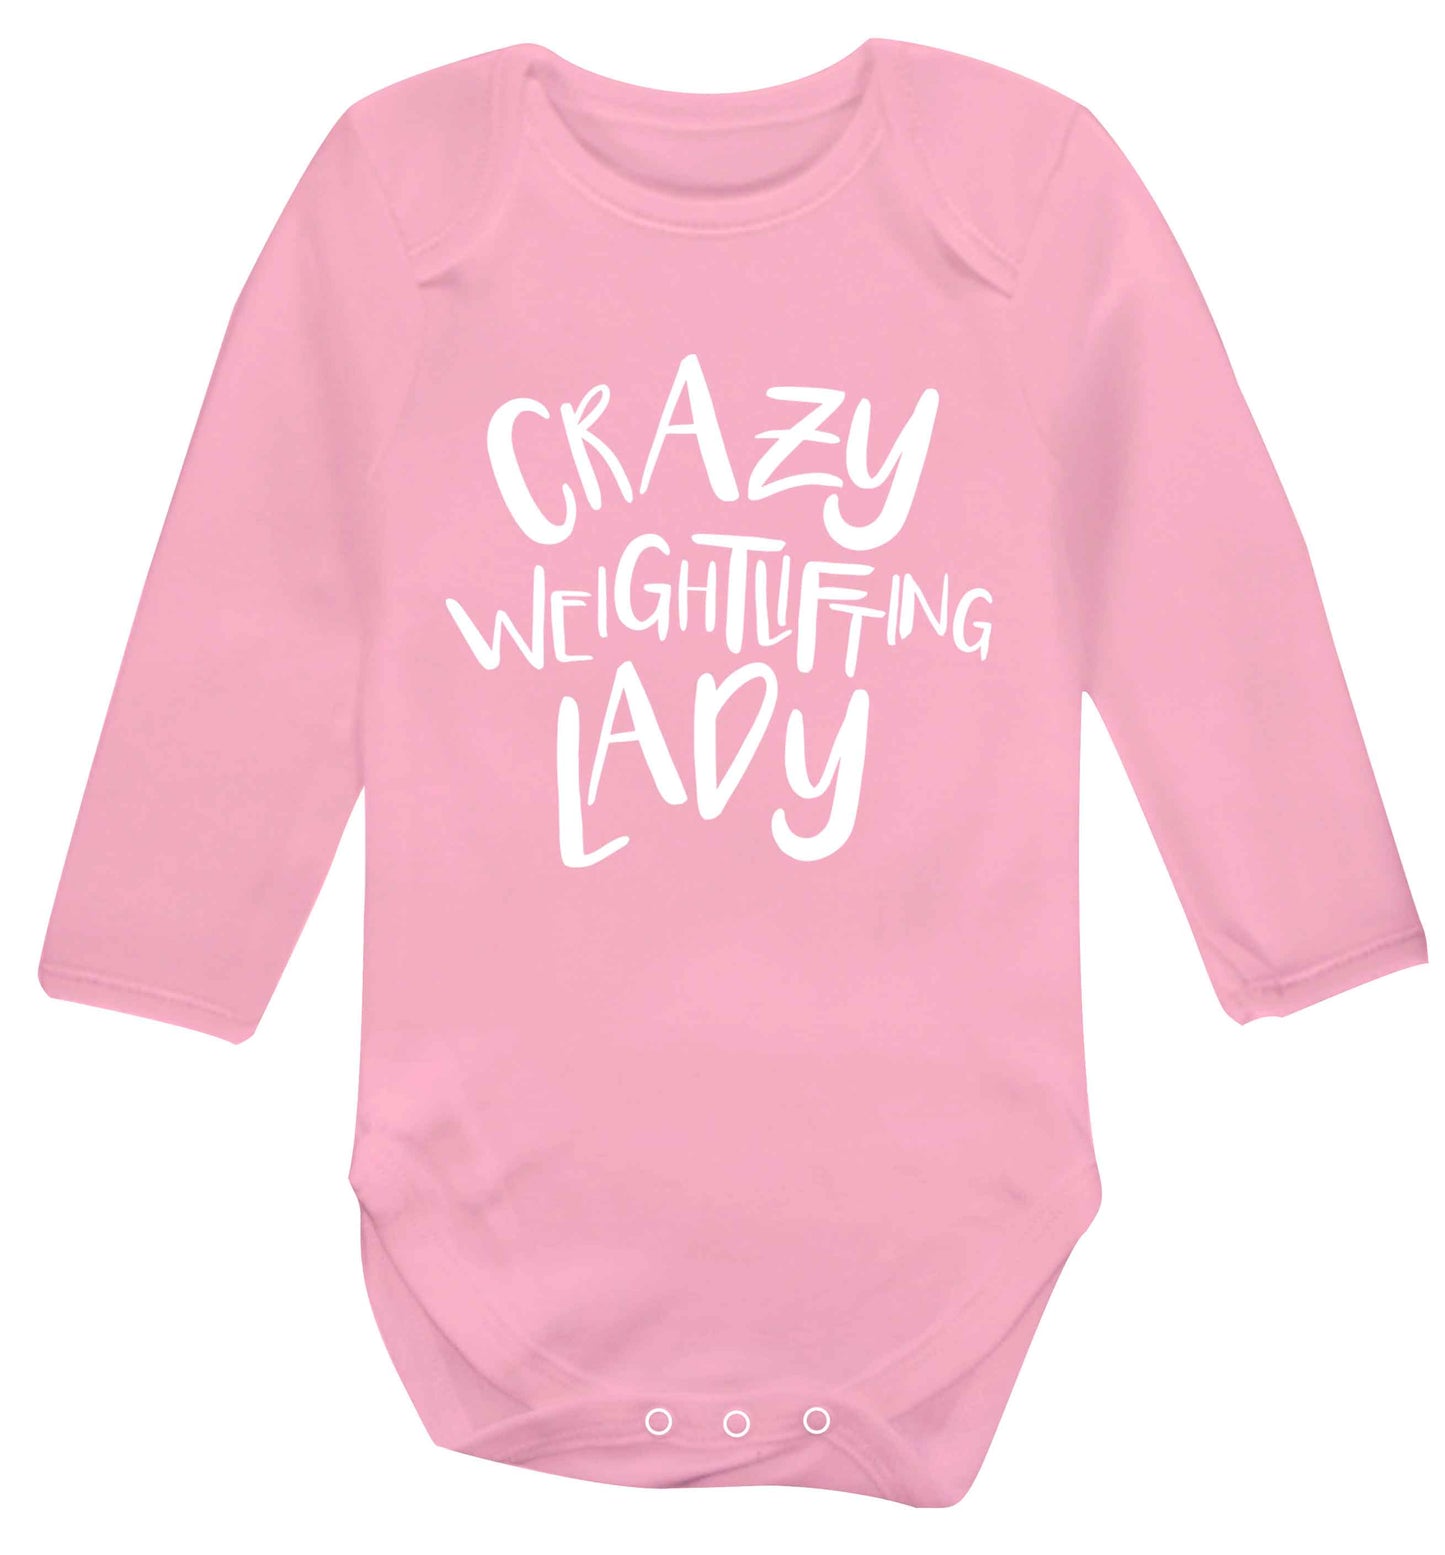 Crazy weightlifting lady Baby Vest long sleeved pale pink 6-12 months